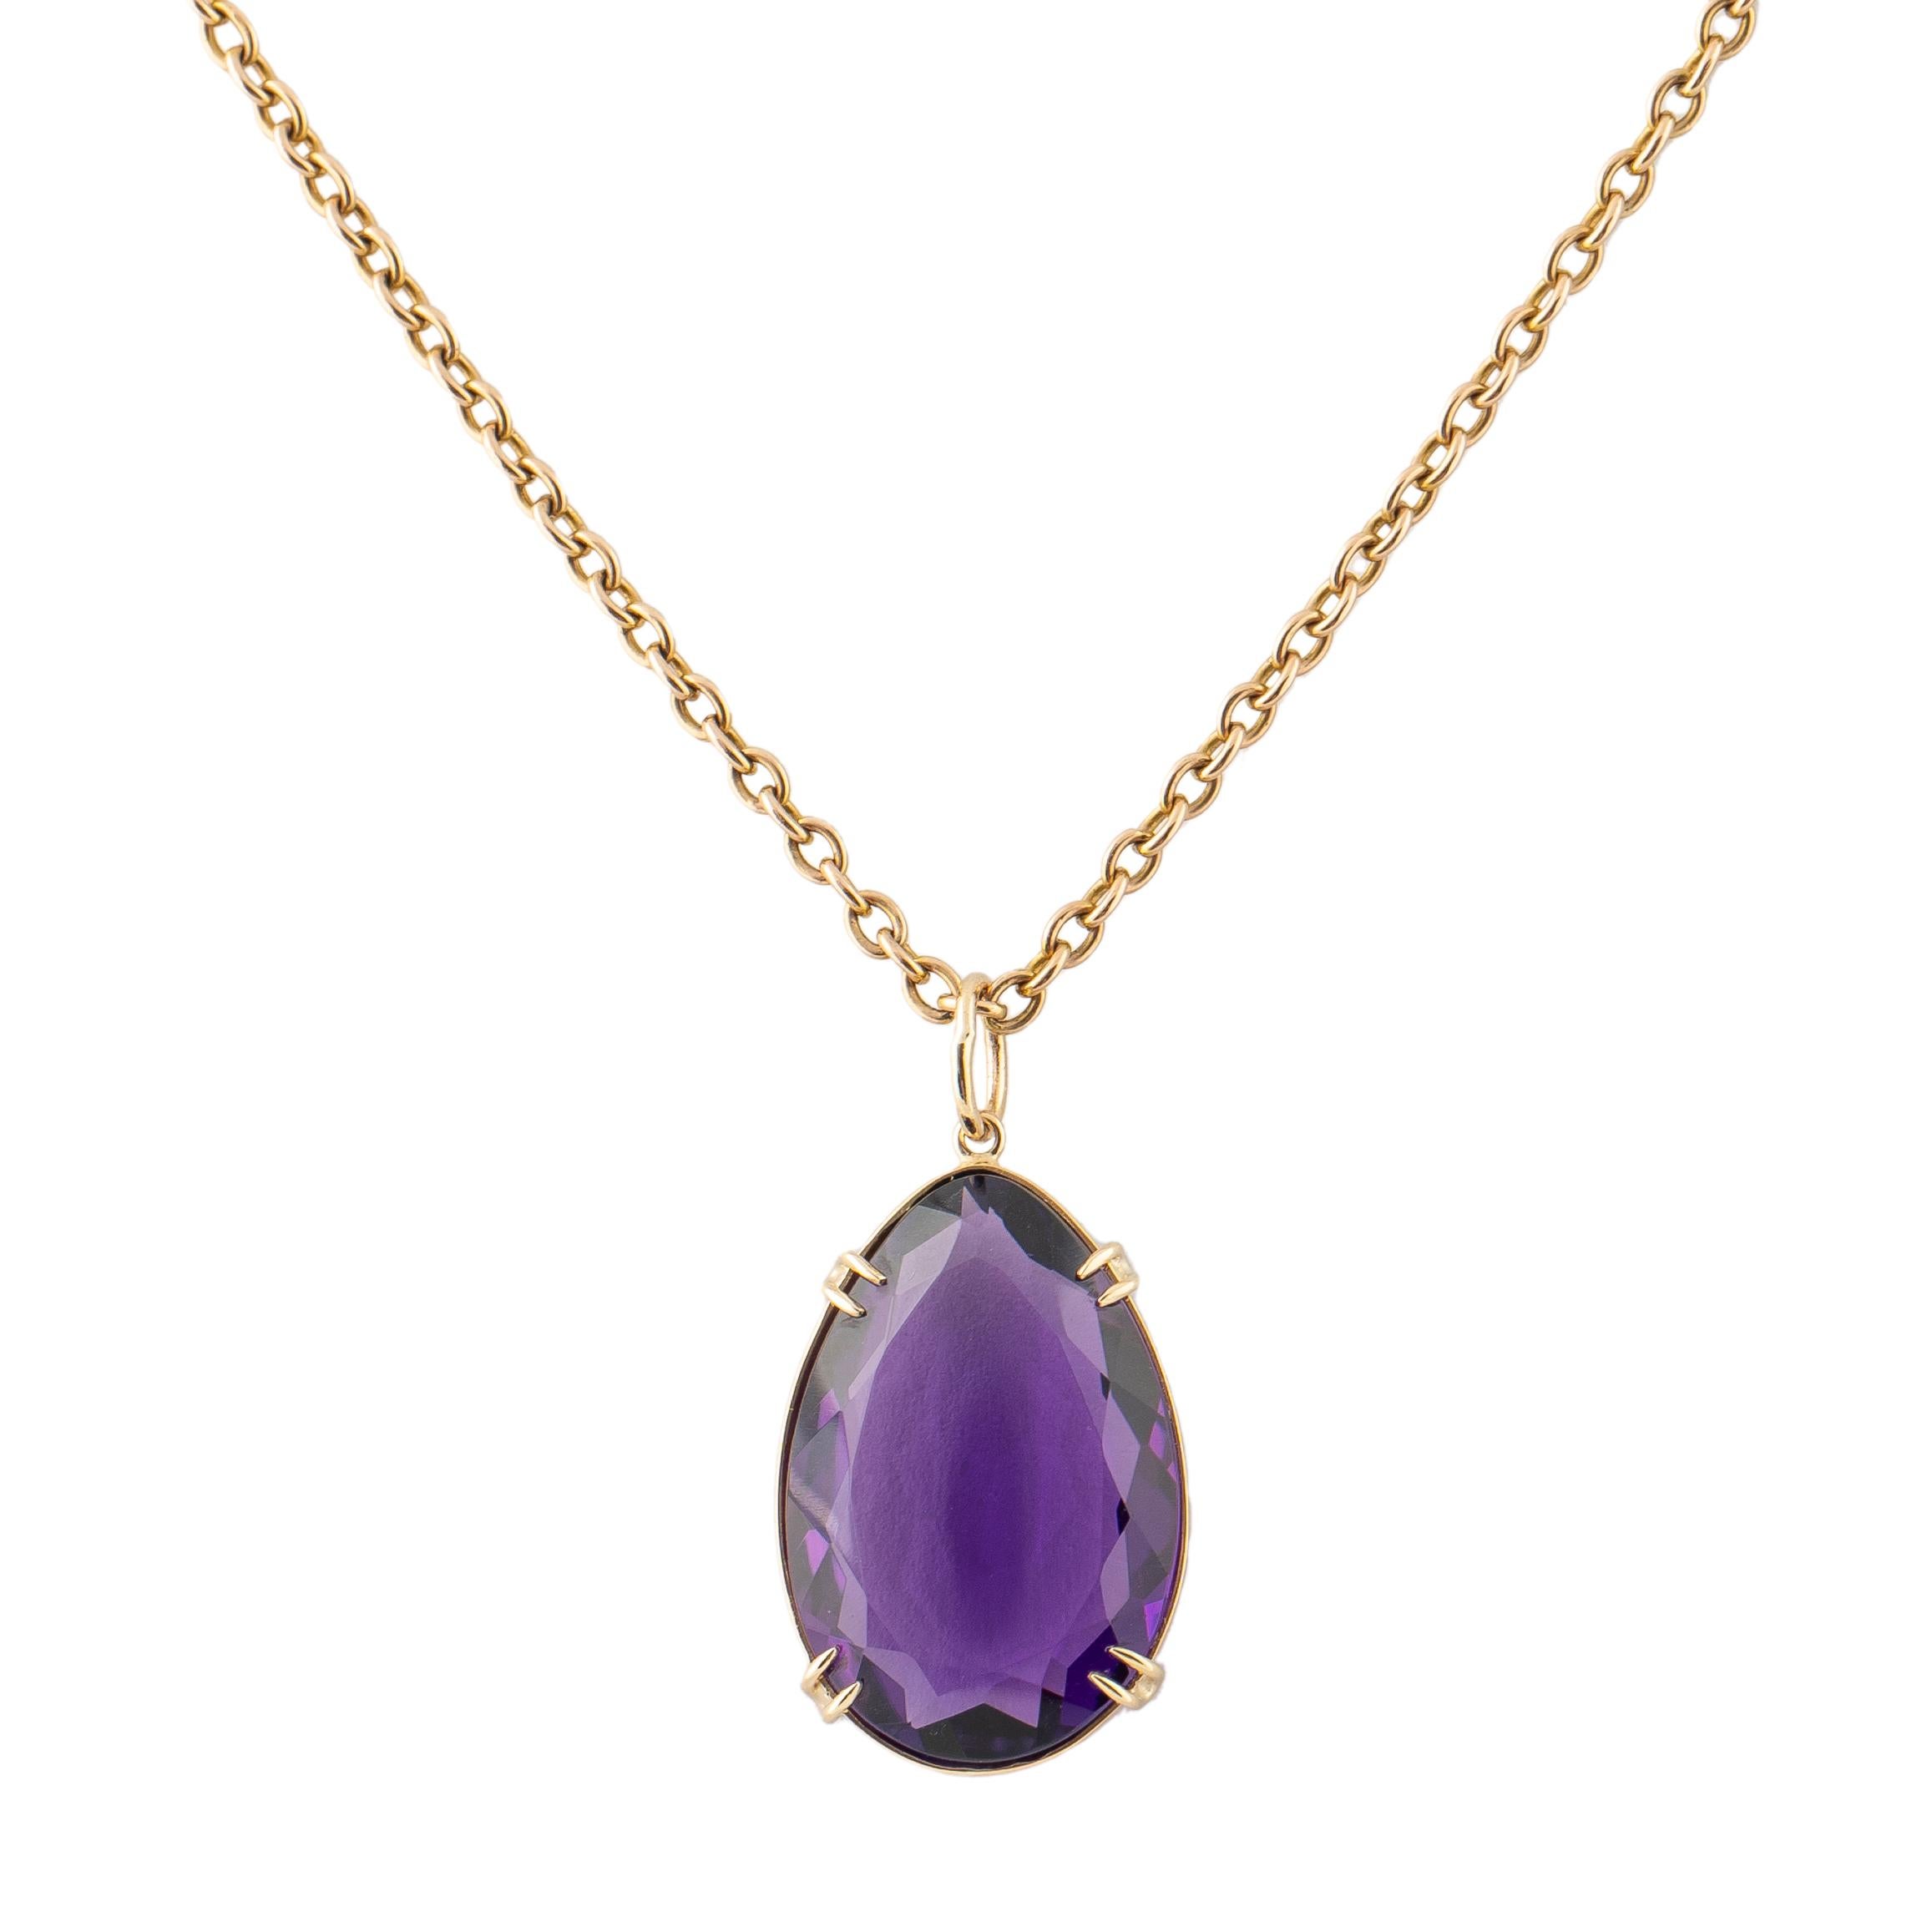 Beautiful custom made amethyst 18k yellow gold pendant set with a tear drop shaped faceted amethyst of deep violet color, bezel and prong set in 18k yellow gold with circular suspension ring to accommodate most chains. 

Amethyst measures 28 x 6.8 x